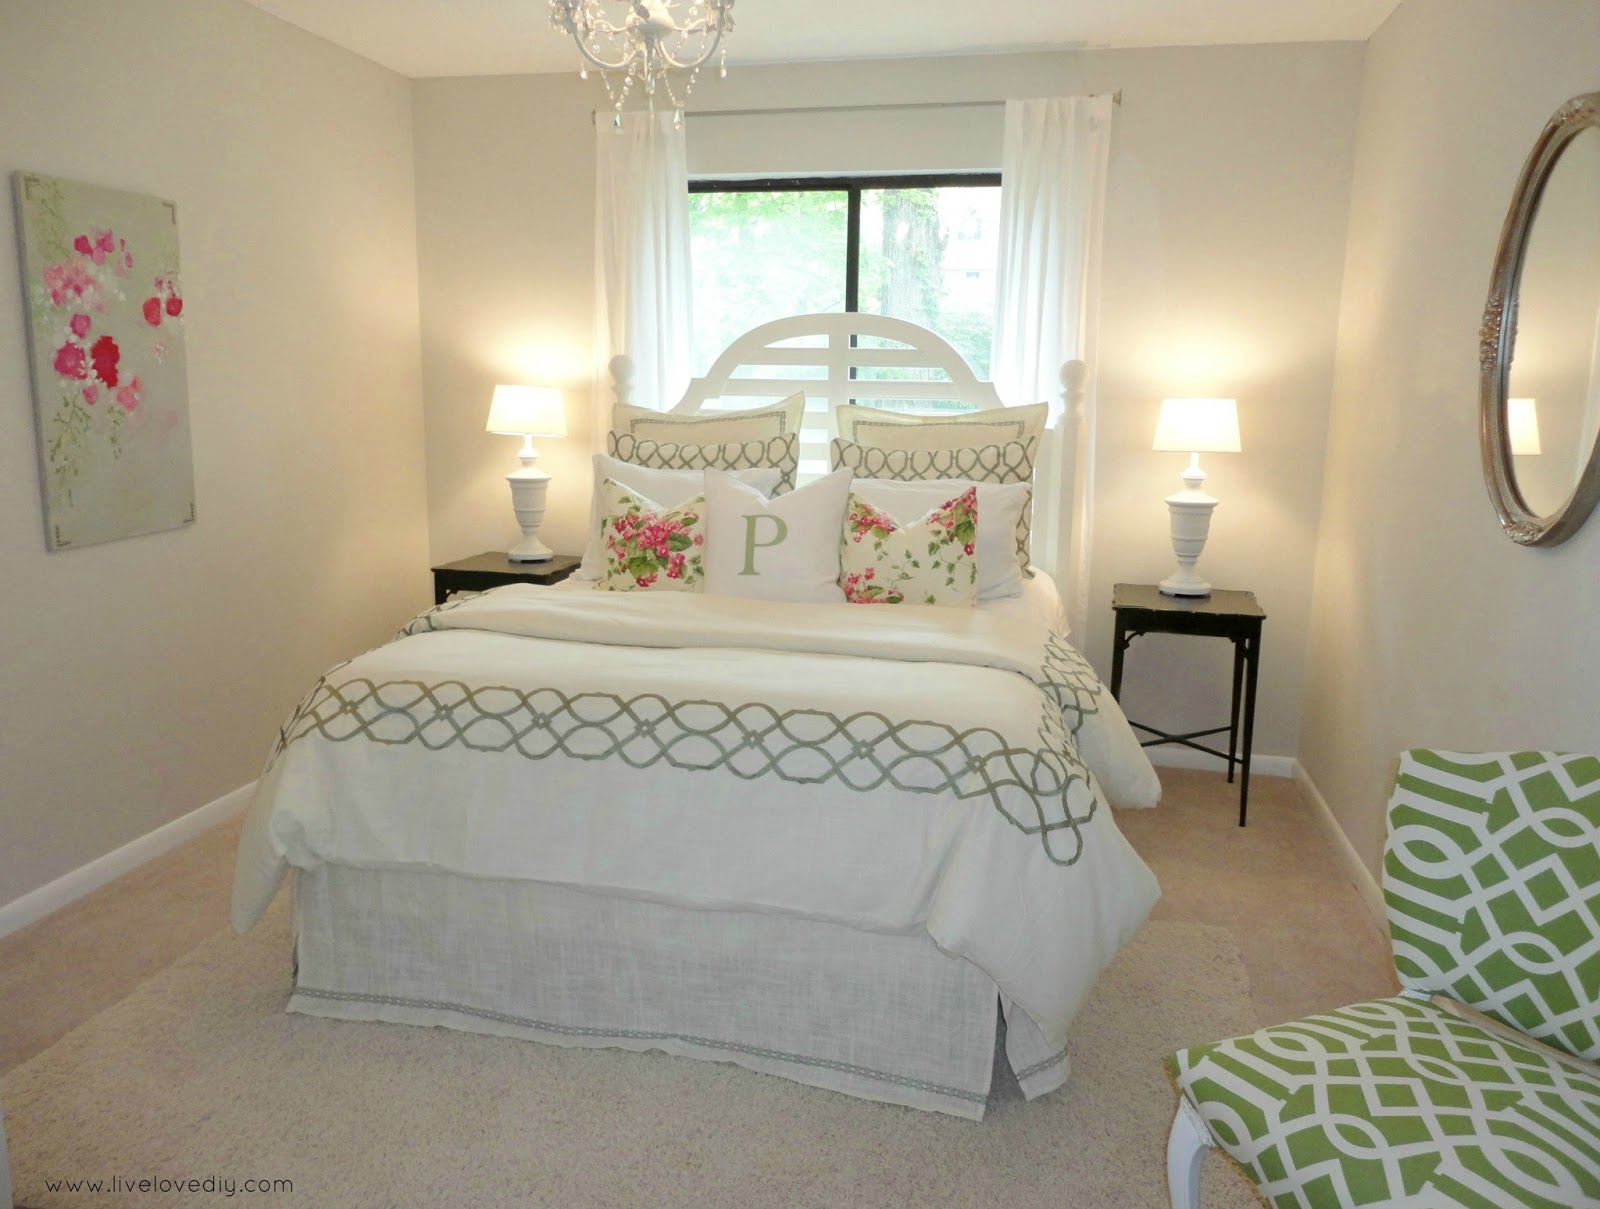 ... : Decorating Bedrooms with Secondhand Finds: The Guest Bedroom Reveal